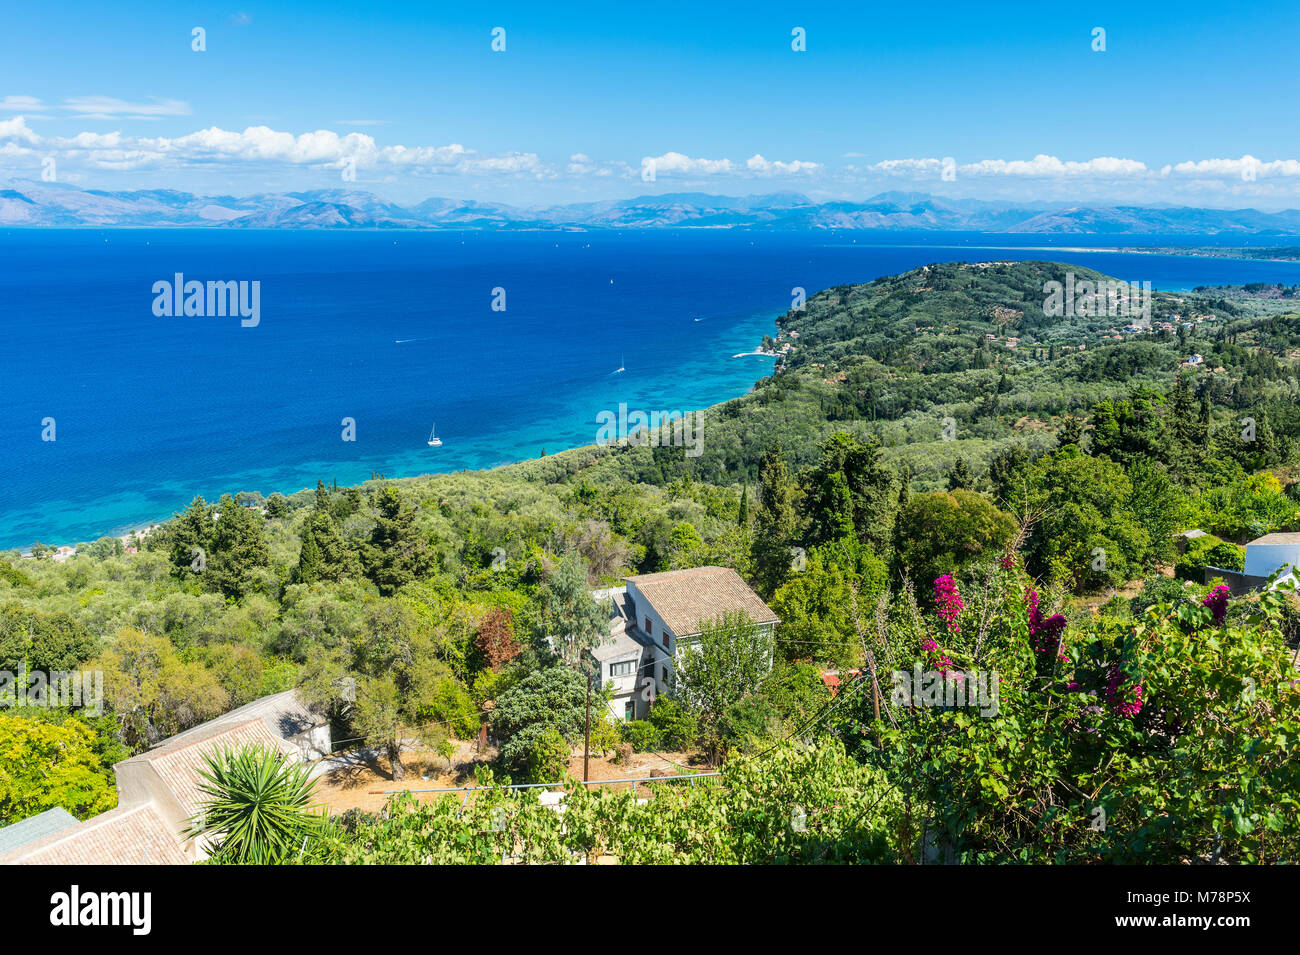 View over the coastline from the mountain village of Chlomos, Corfu, Ionian Islands, Greek Islands, Greece, Europe Stock Photo